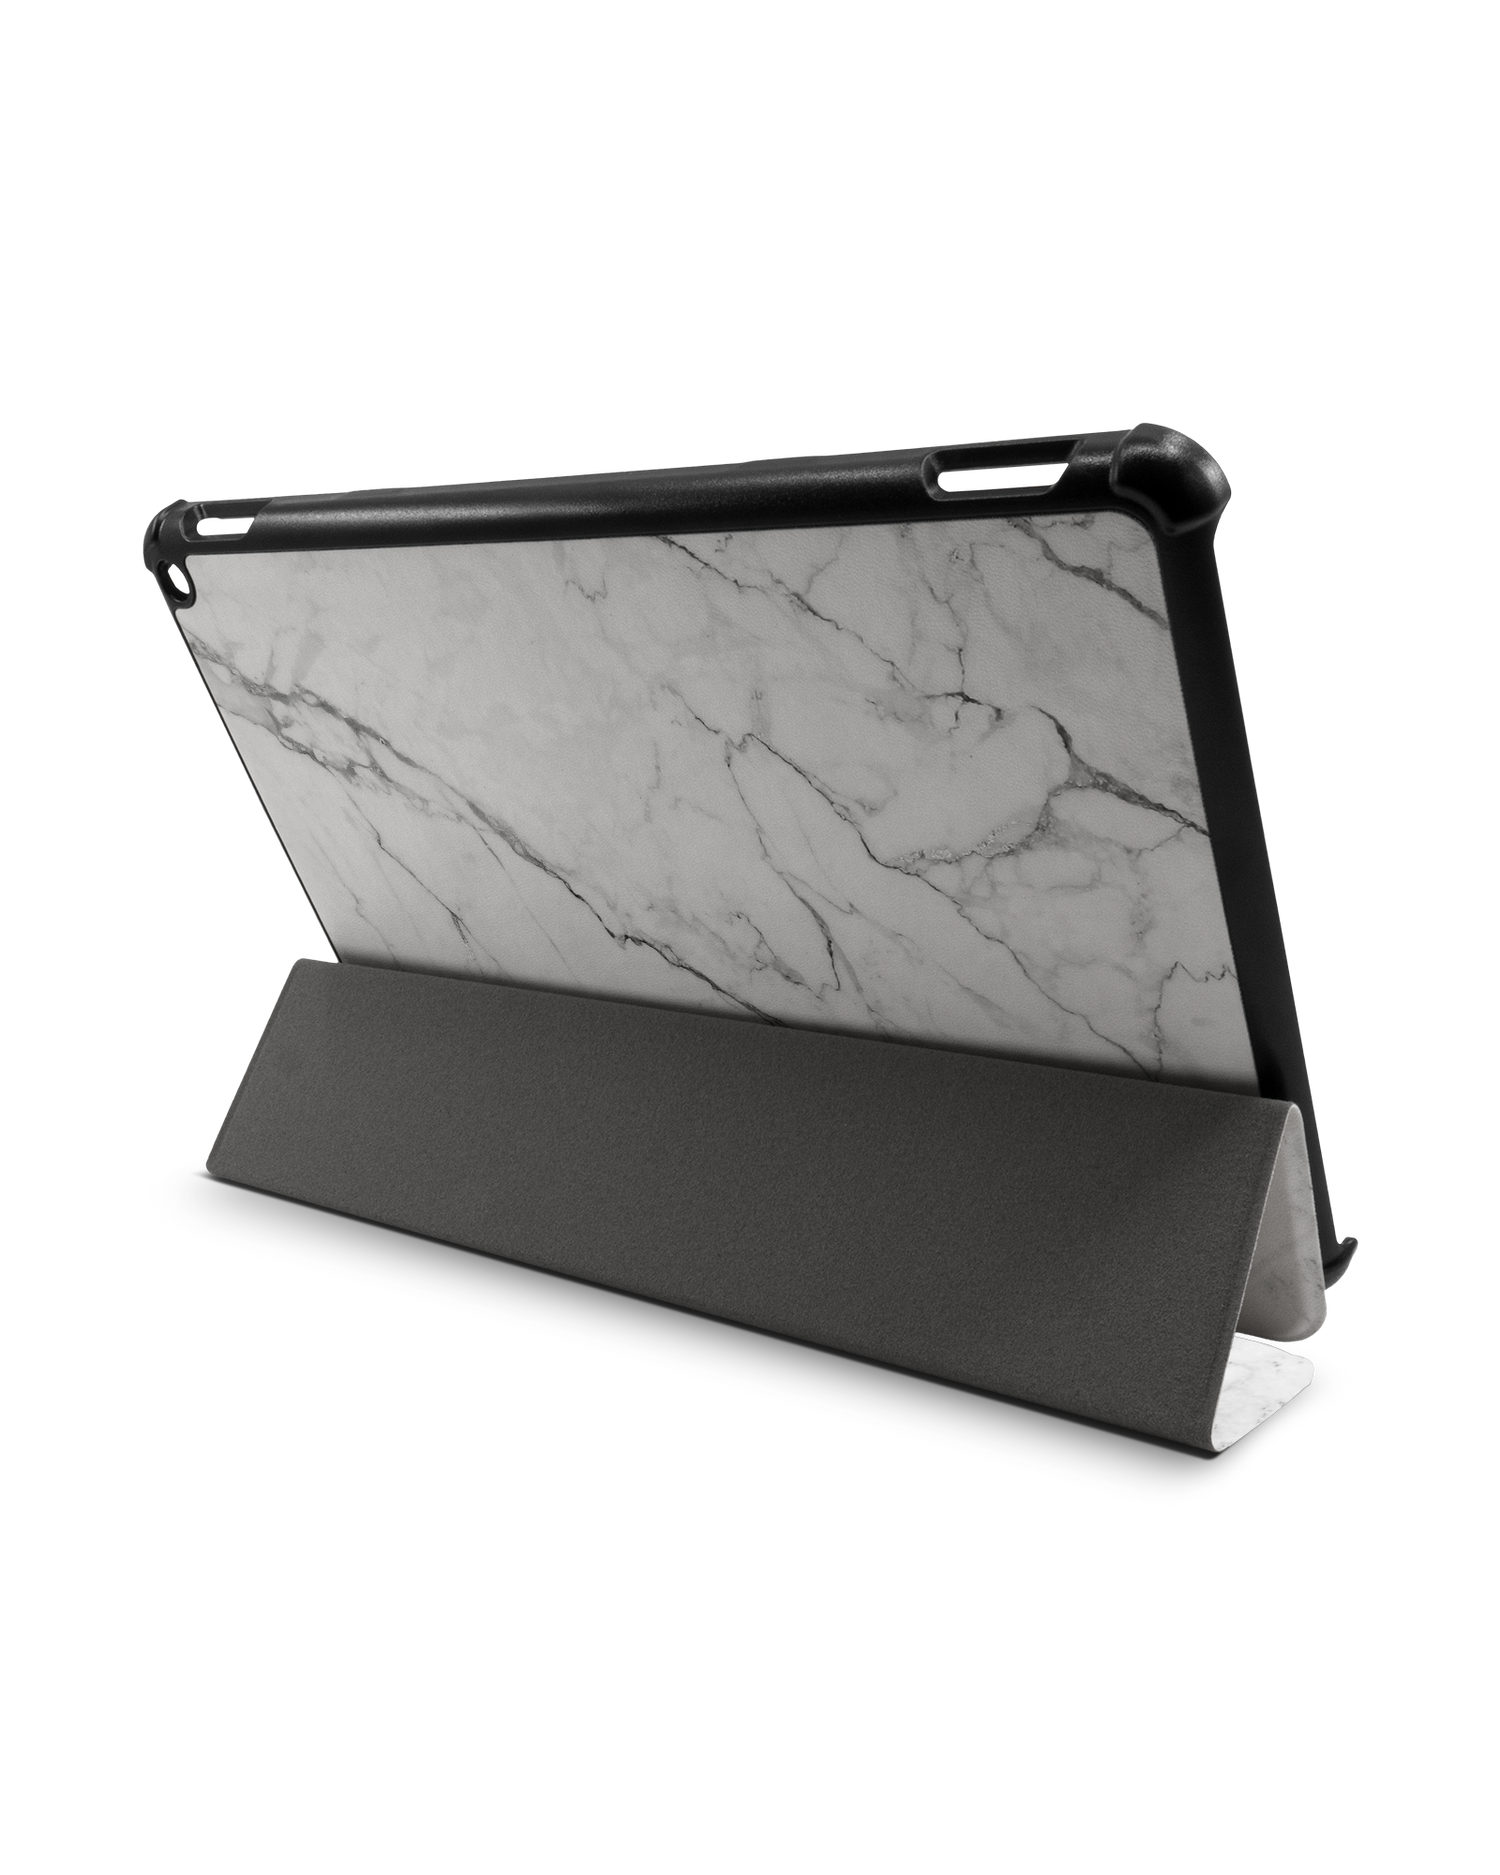 White Marble Tablet Smart Case for Amazon Fire HD 10 (2021): Used as Stand